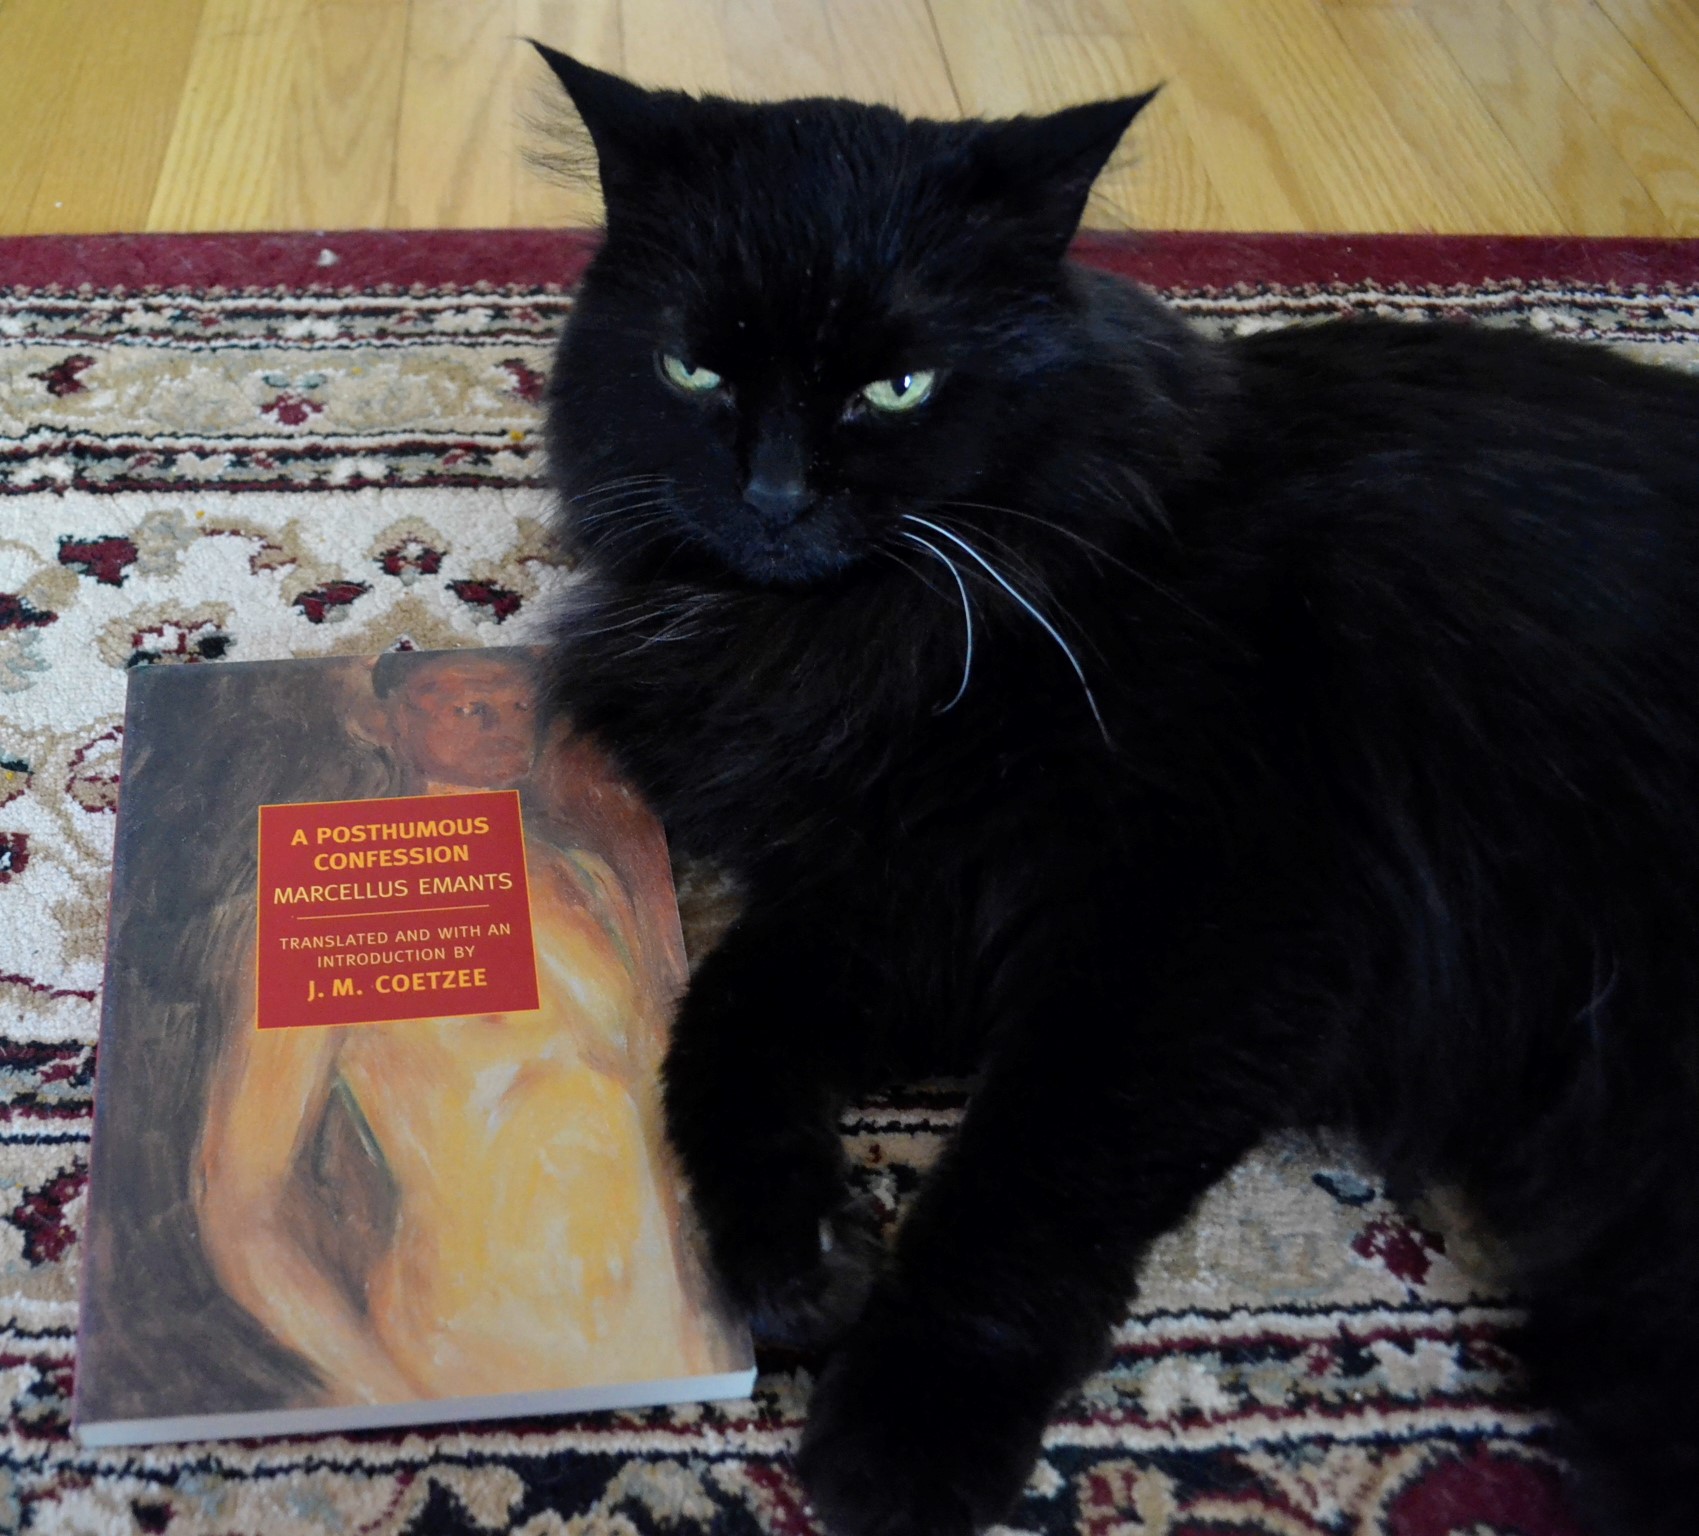 A fluffy black cat leans suavely against the side of a book.